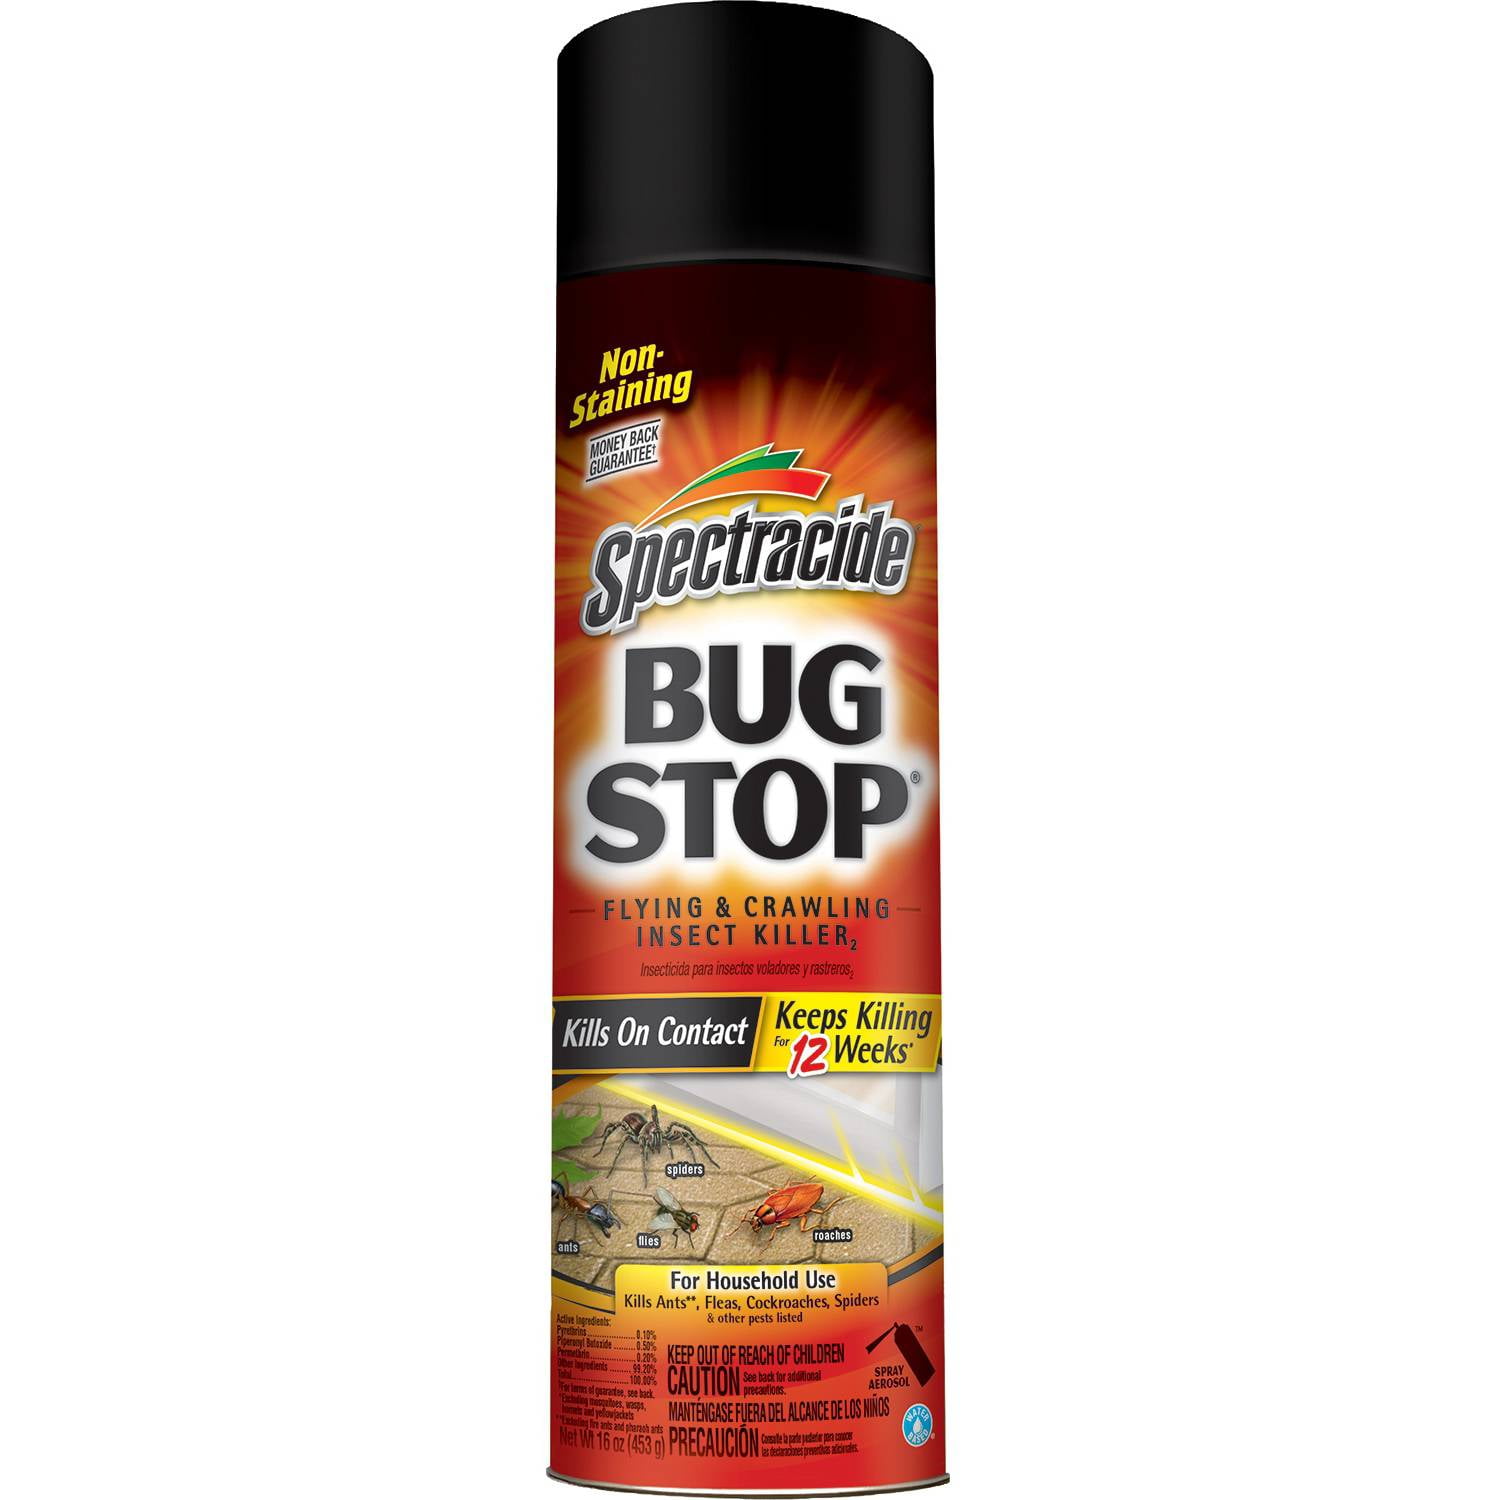 Spectracide Bug Stop Flying and Crawling Insect Killer Aerosol, 16 oz